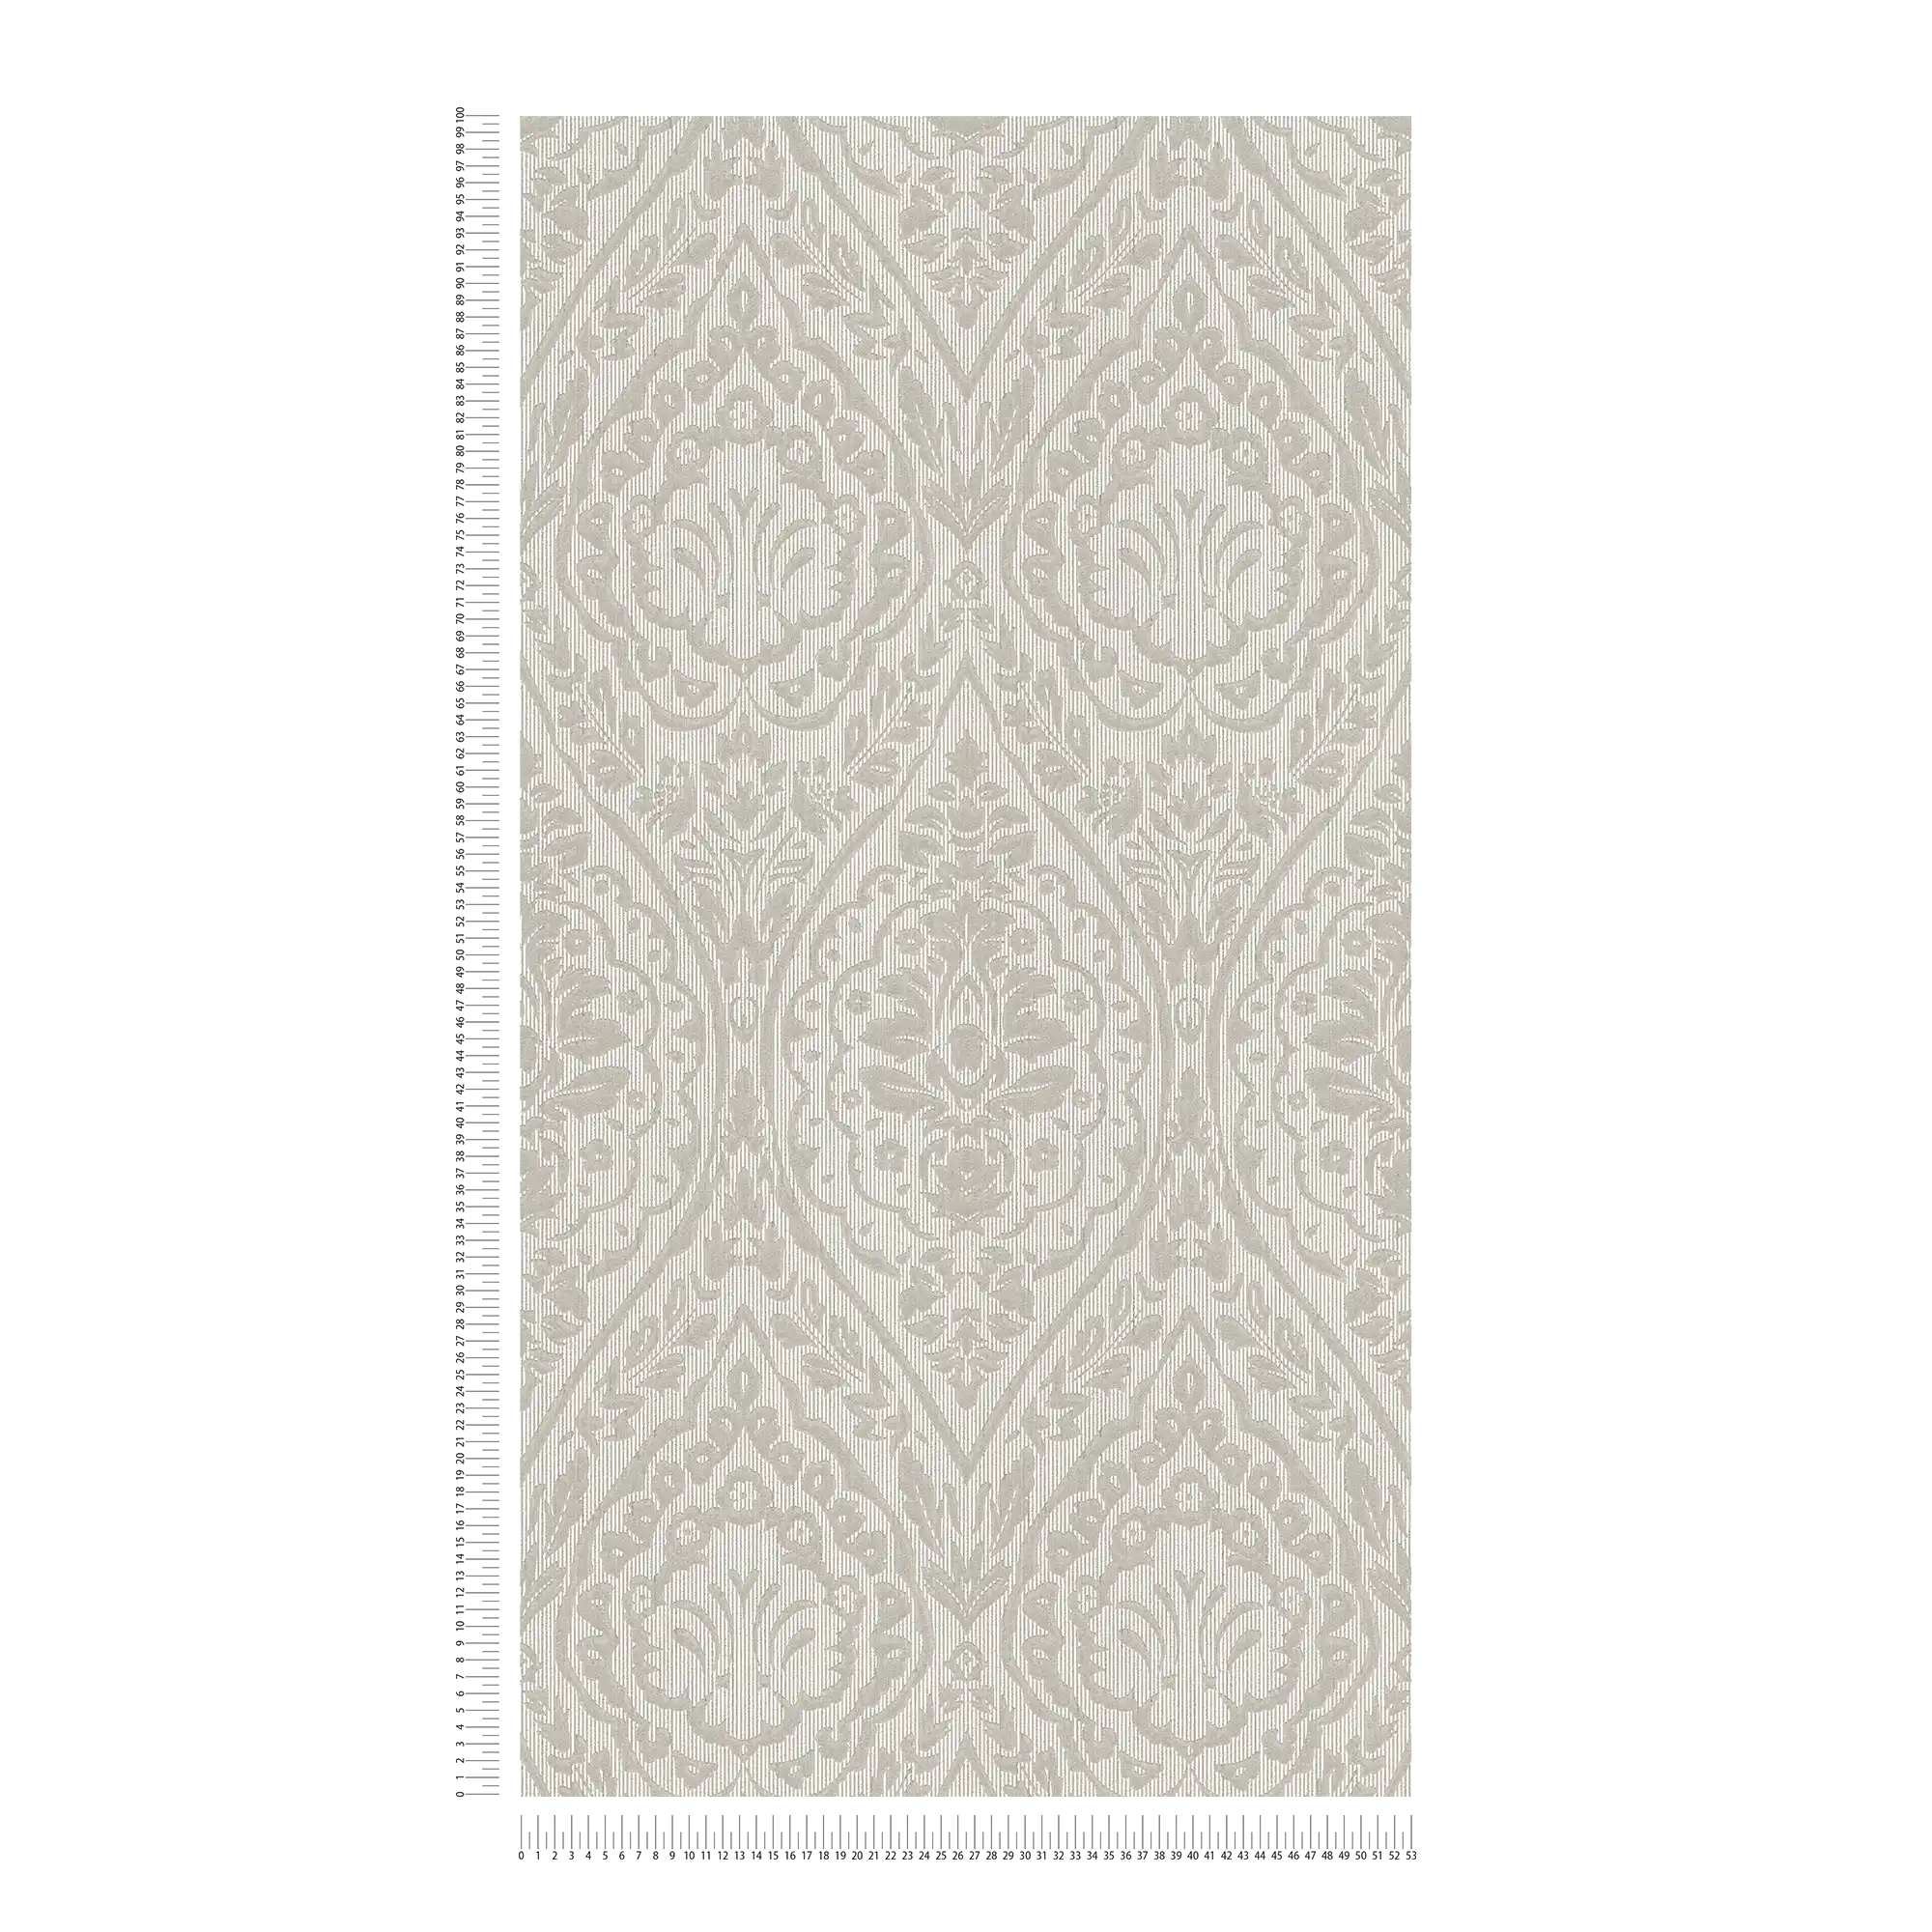             Colonial style non-woven wallpaper floral pattern & texture effect - cream
        